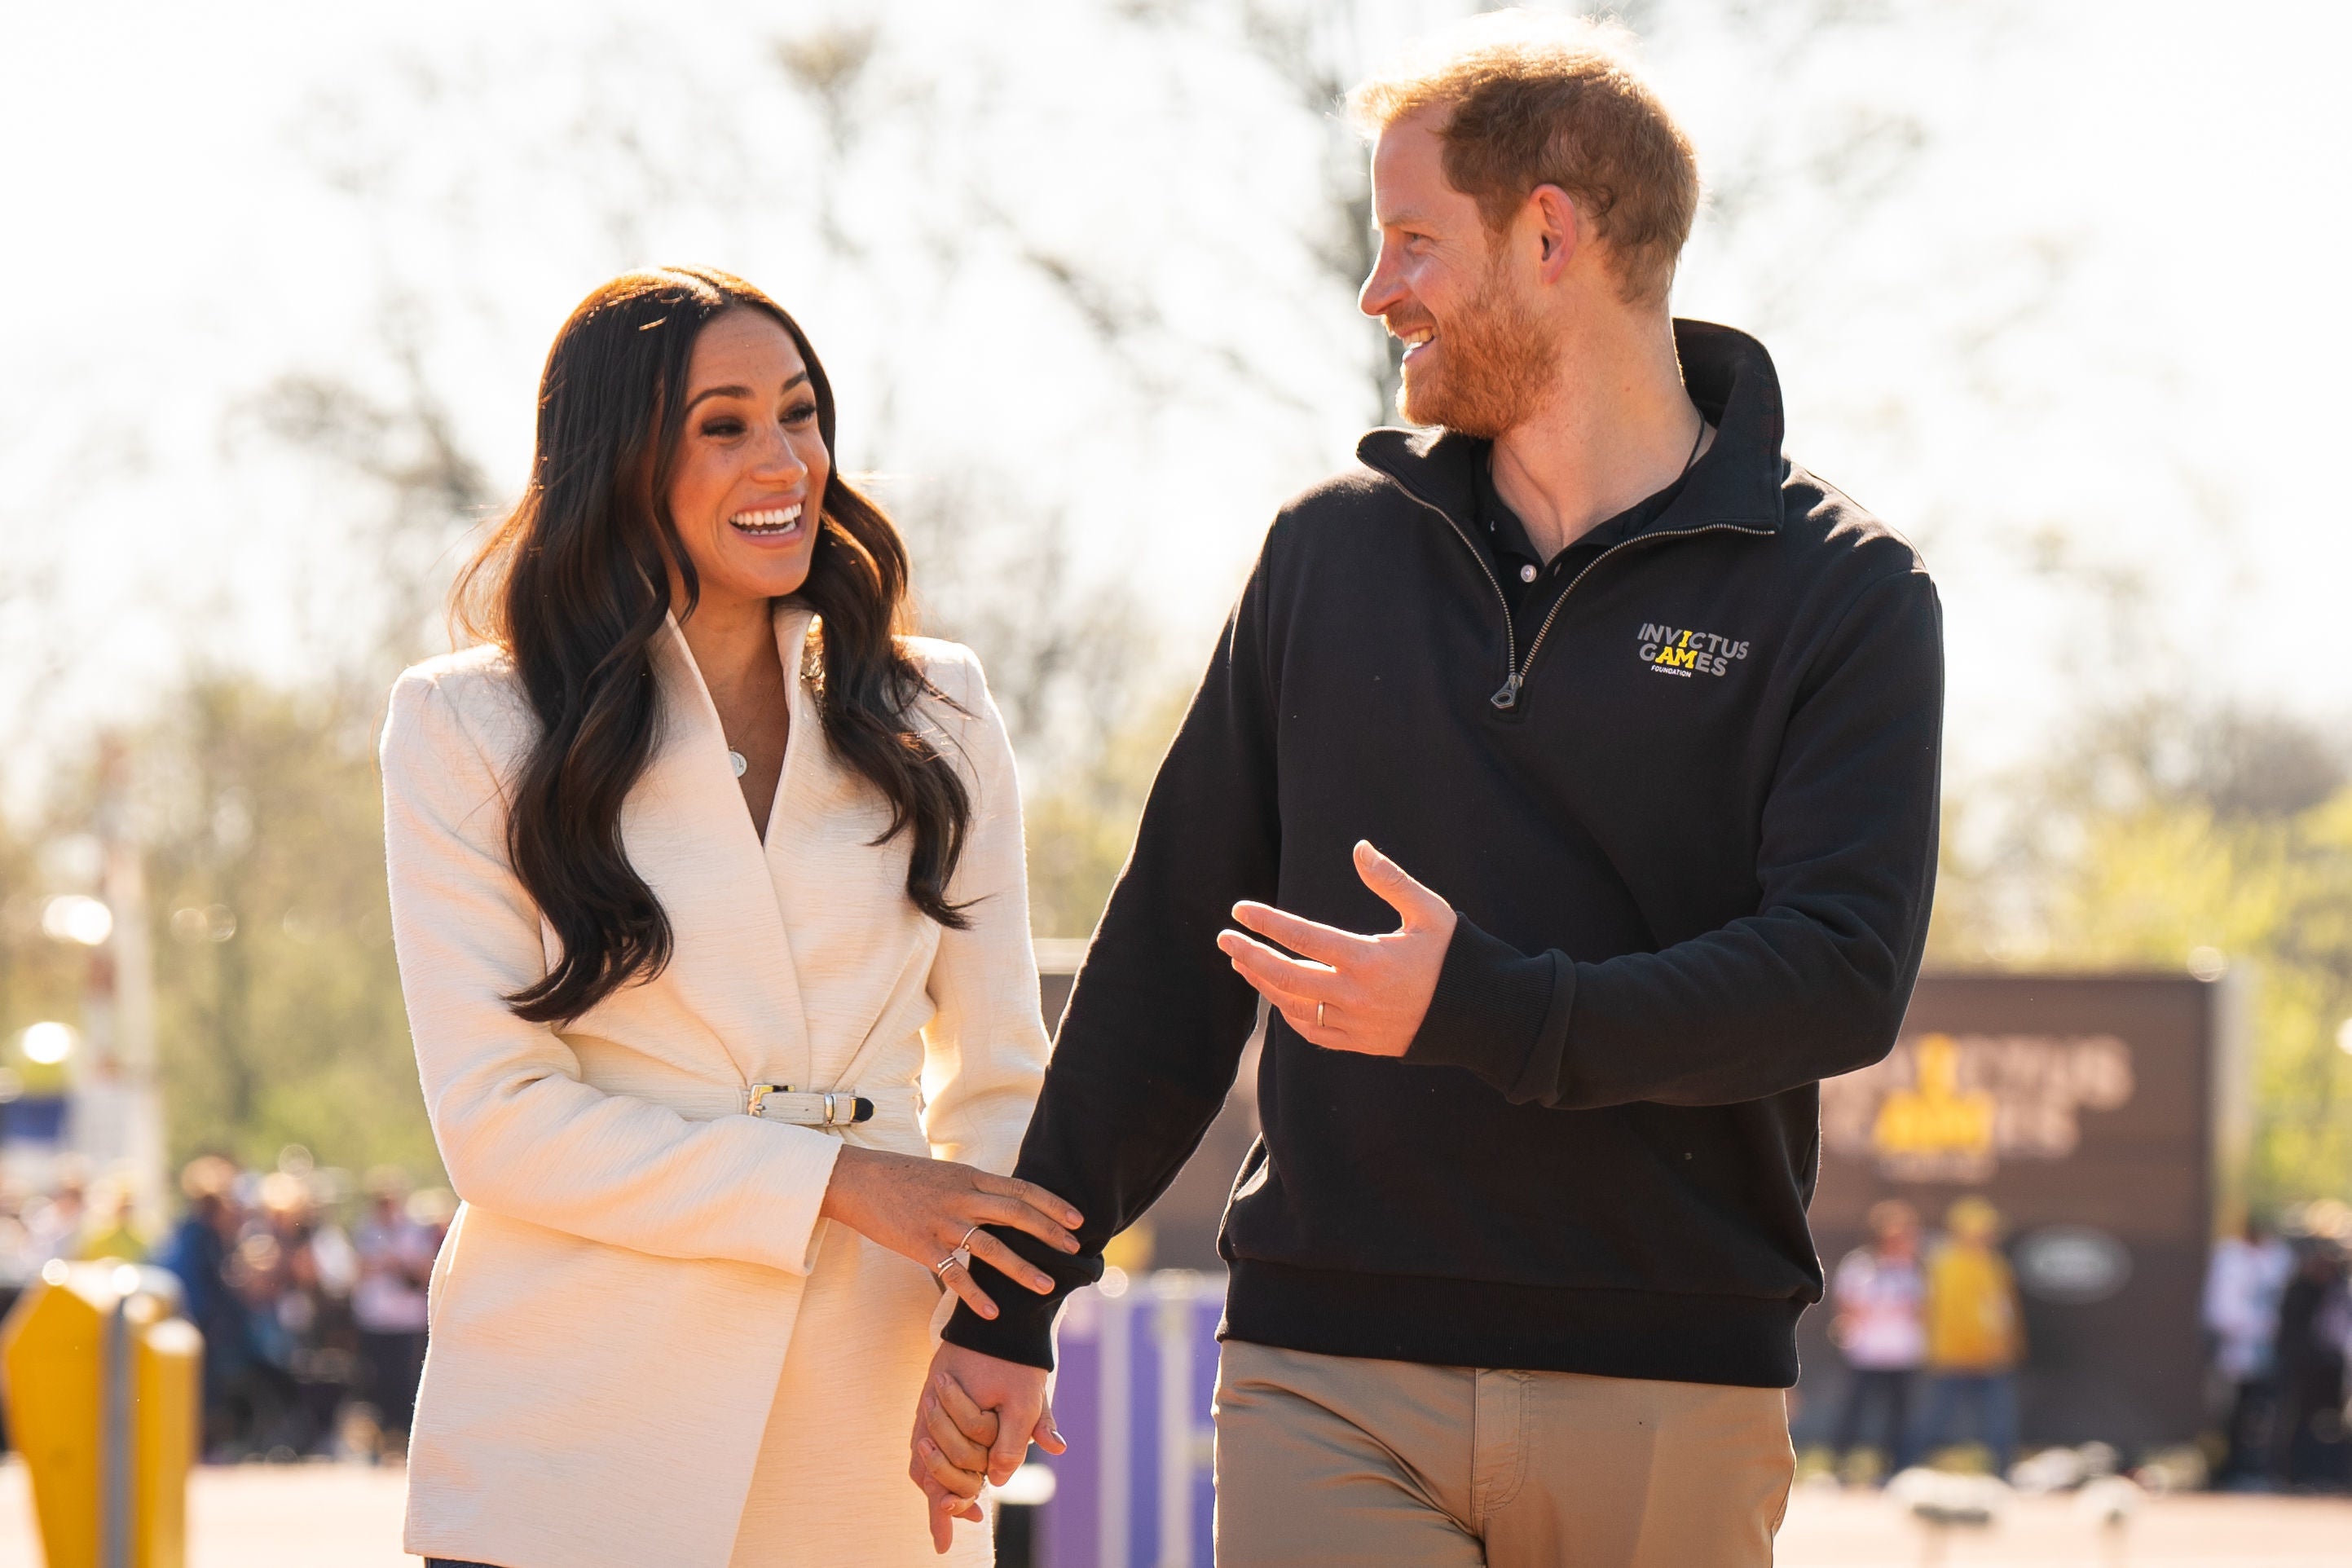 Harry and Meghan have kept their silence so far around Scobie’s bombshell claims